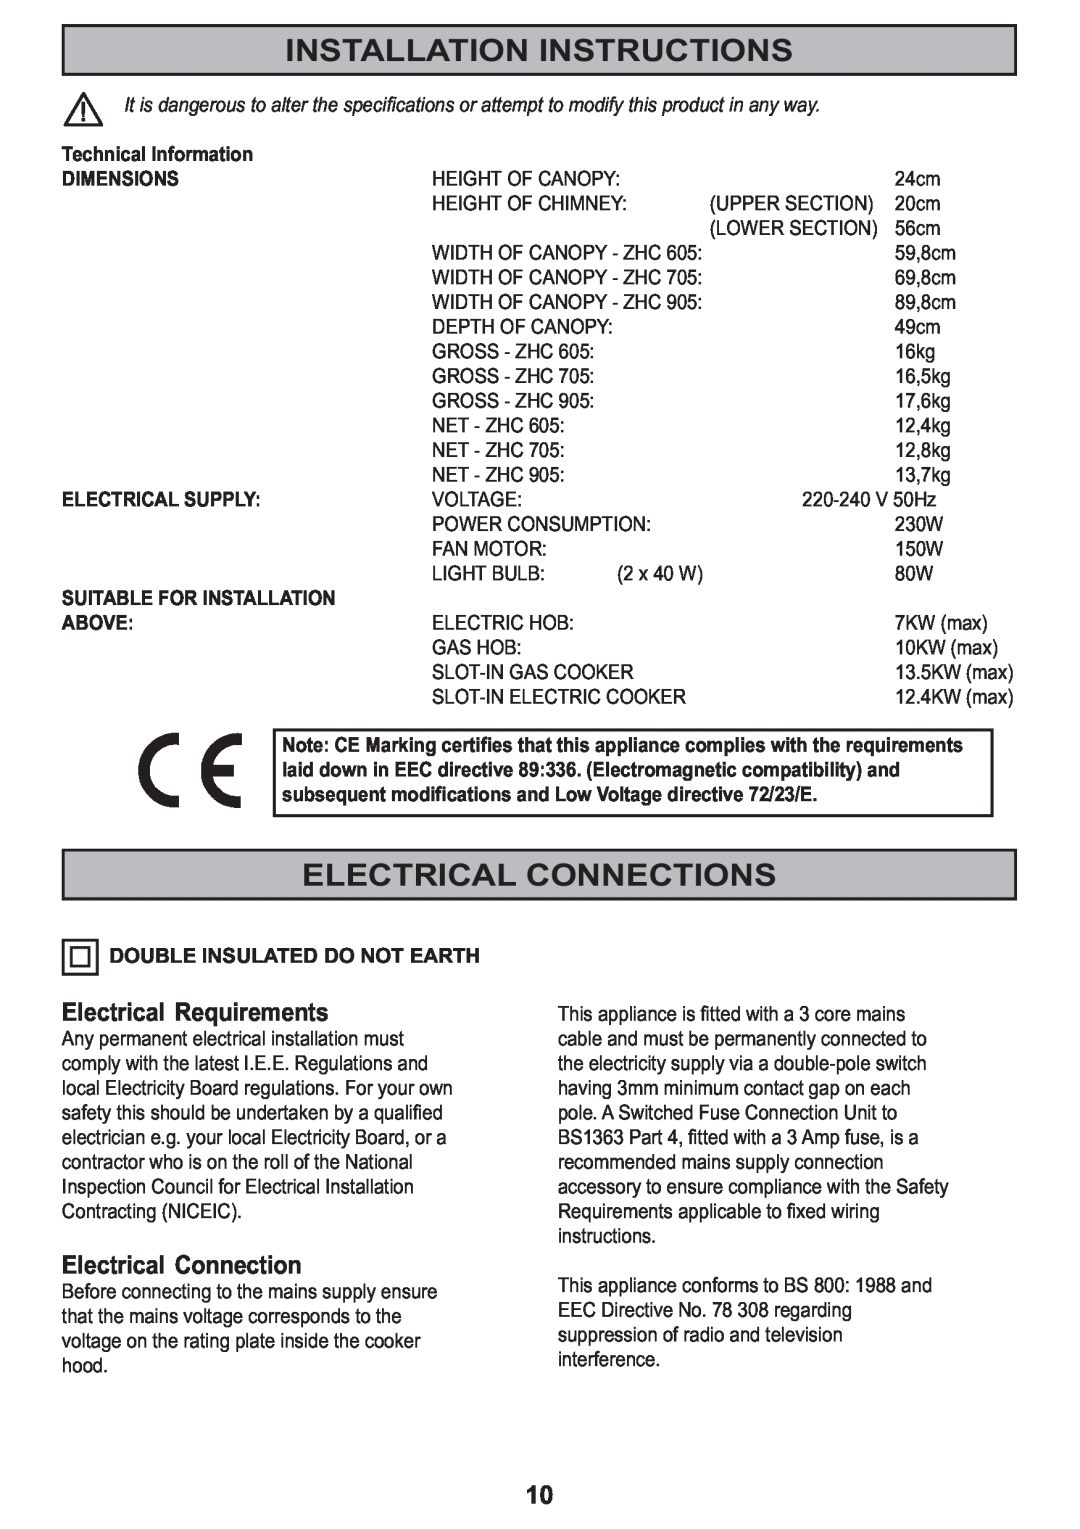 Zanussi ZHC705, ZHC905 Installation Instructions, Electrical Connections, Dimensions, Suitable For Installation, Above 